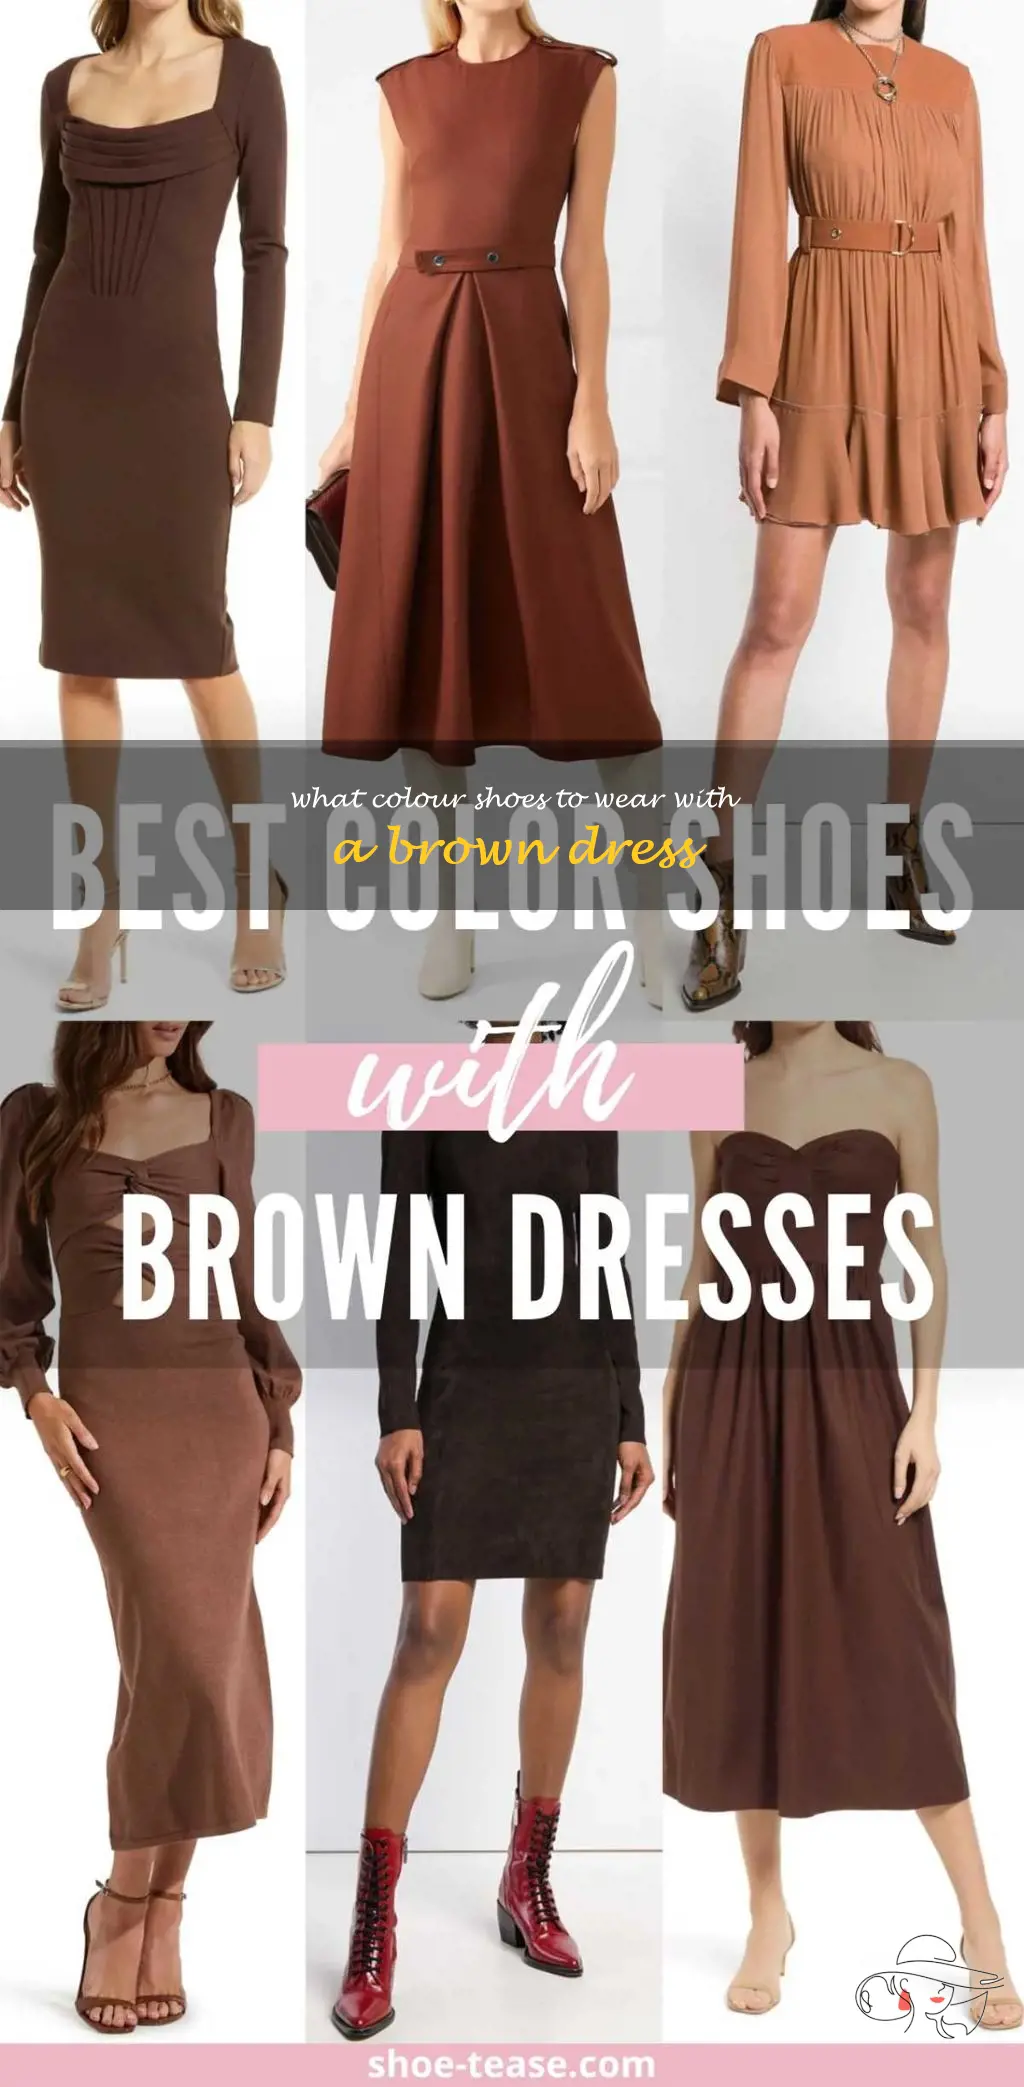 what colour shoes to wear with a brown dress